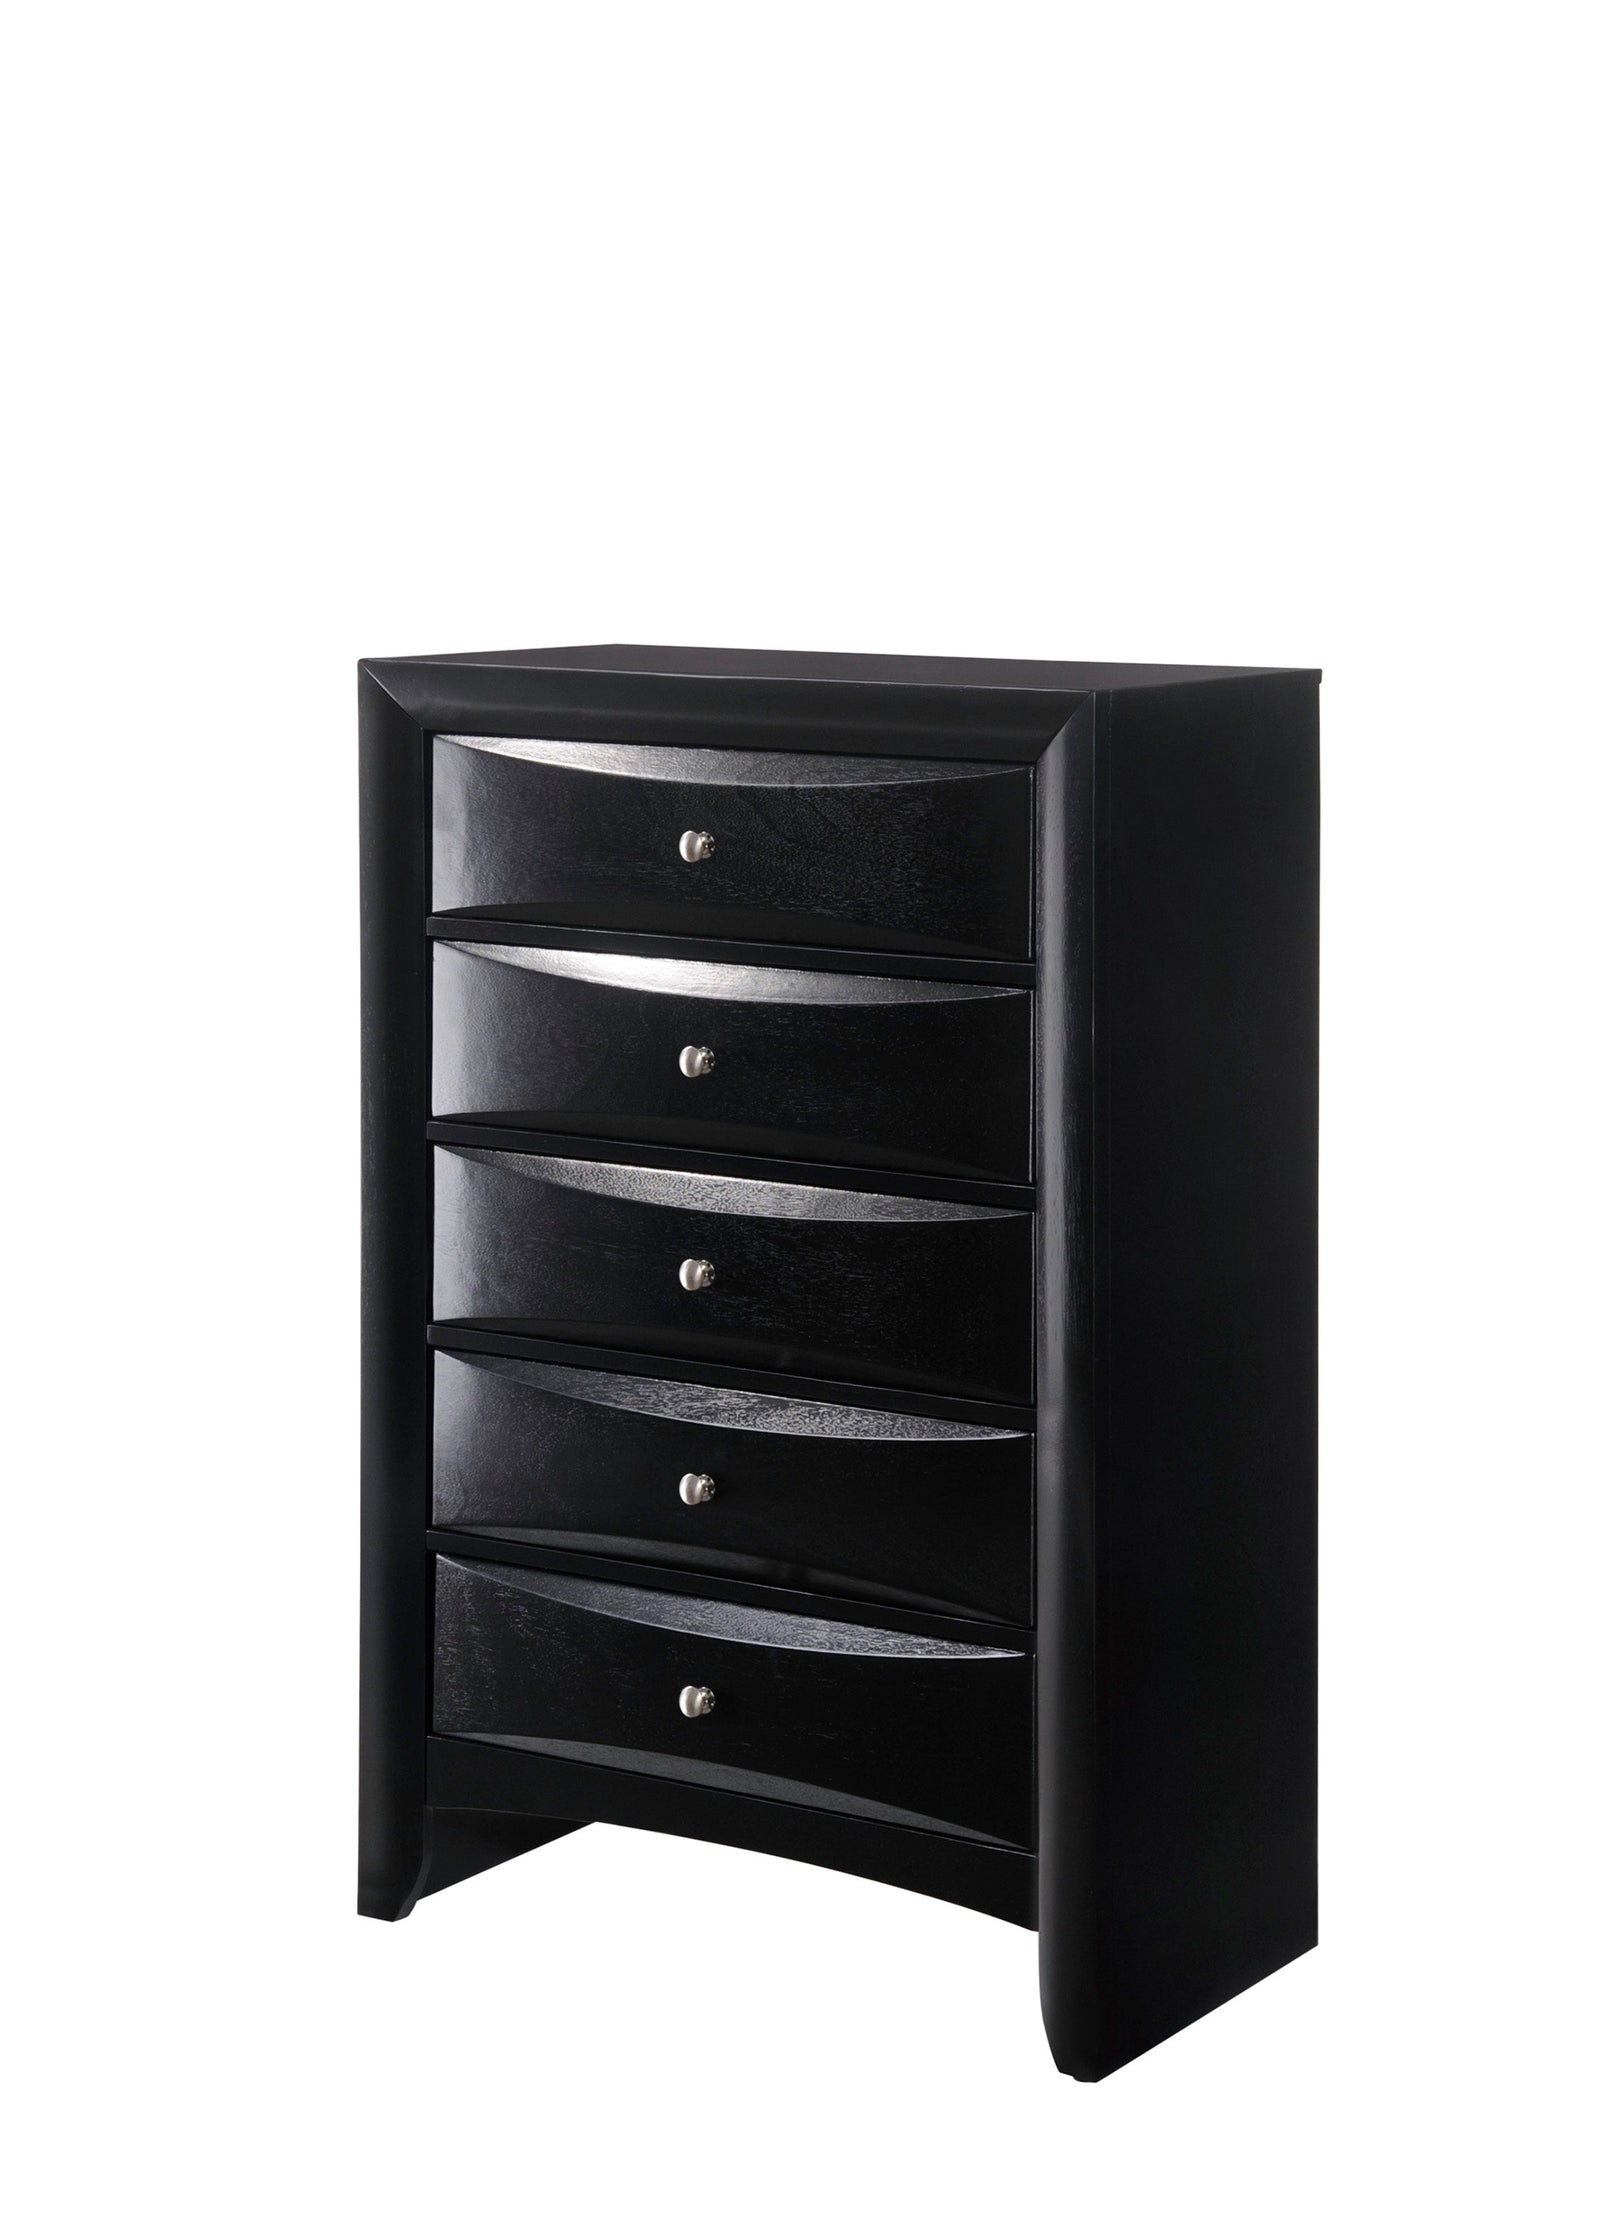 Black Emily Chest, Contemporary Modern Wood, Silver Nickel Knob 5 Drawers